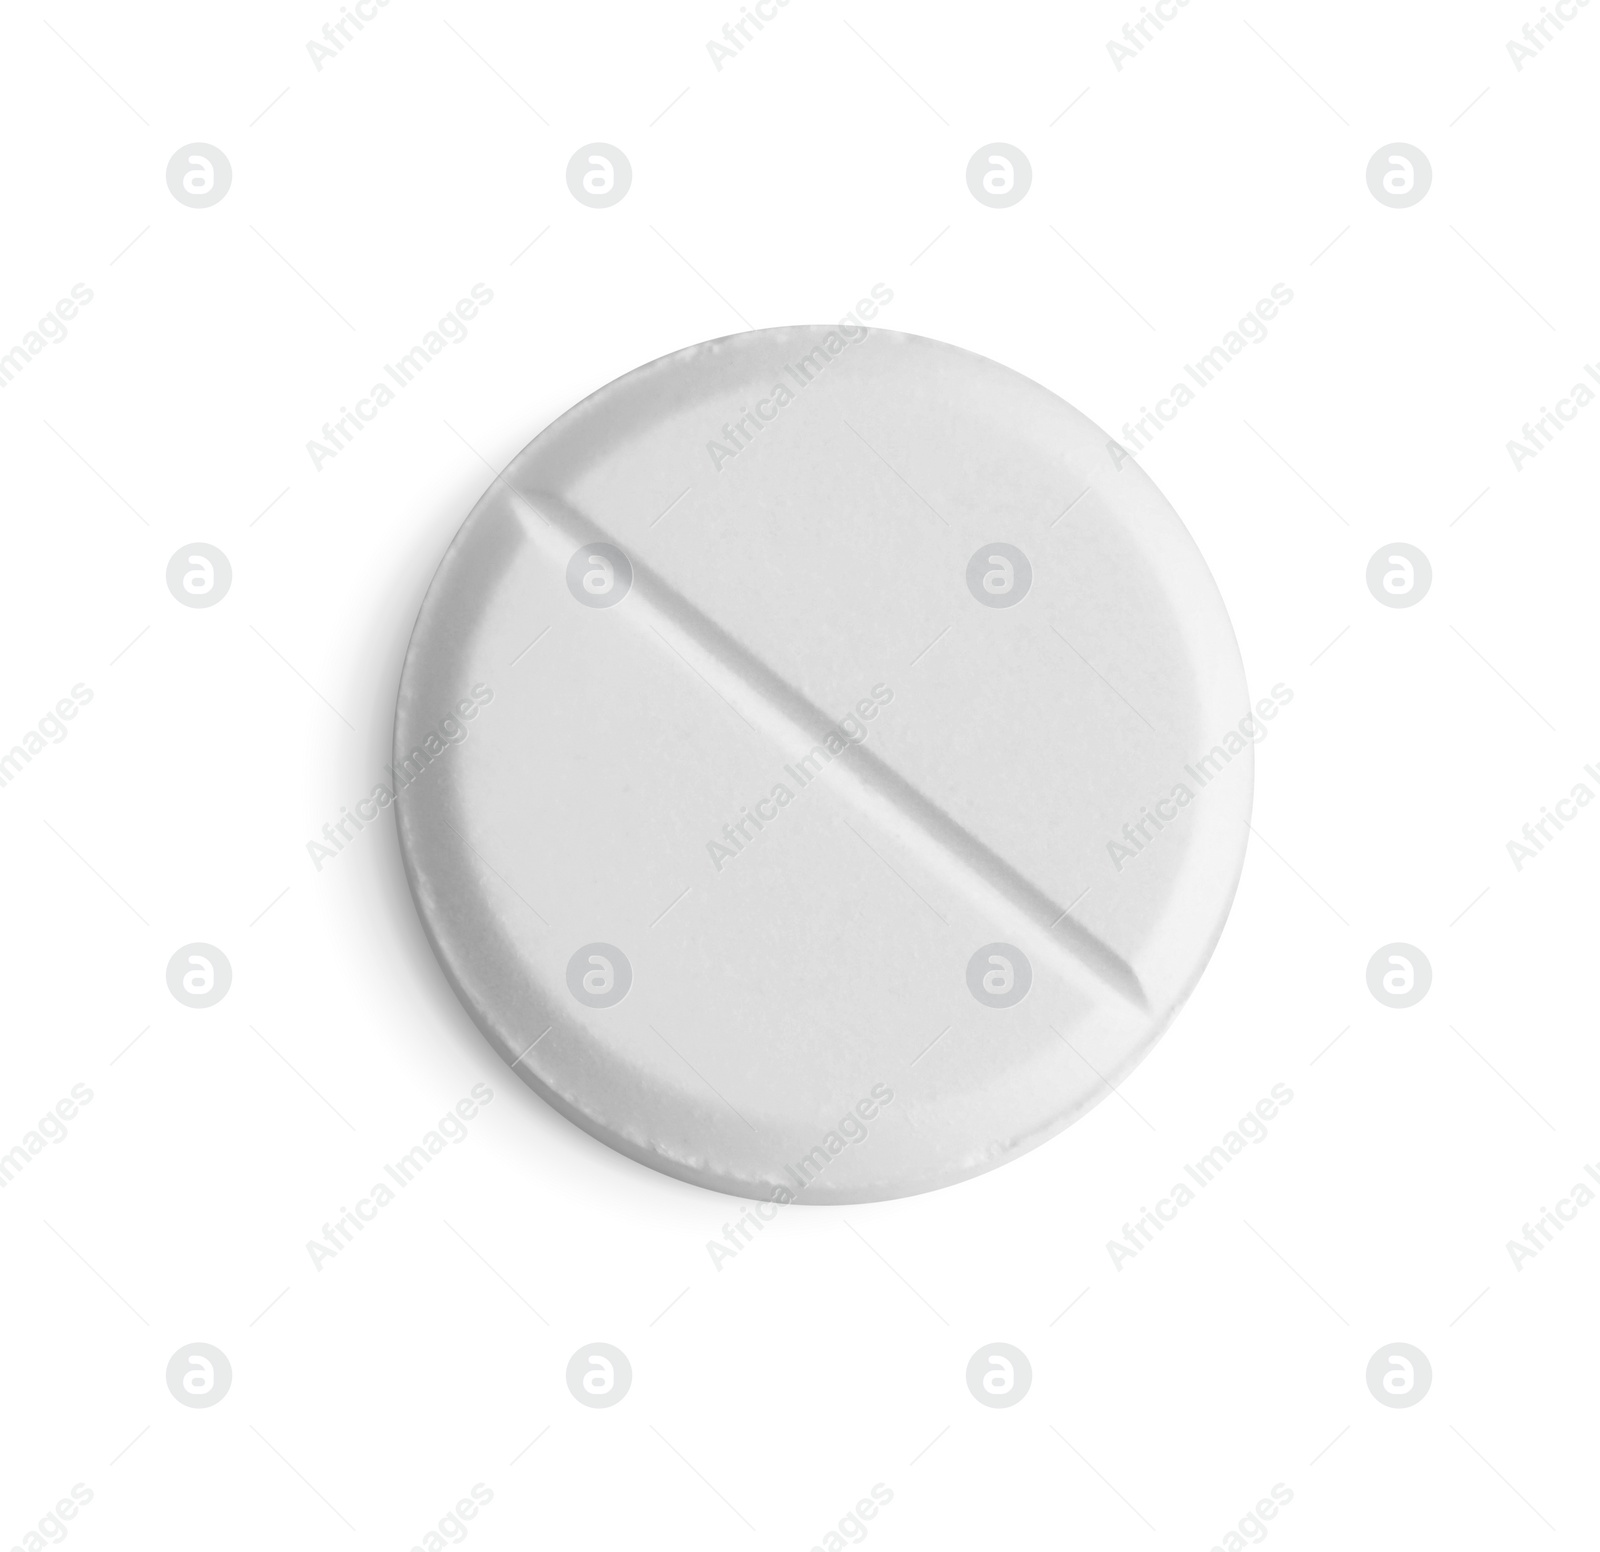 Photo of One pill isolated on white, top view